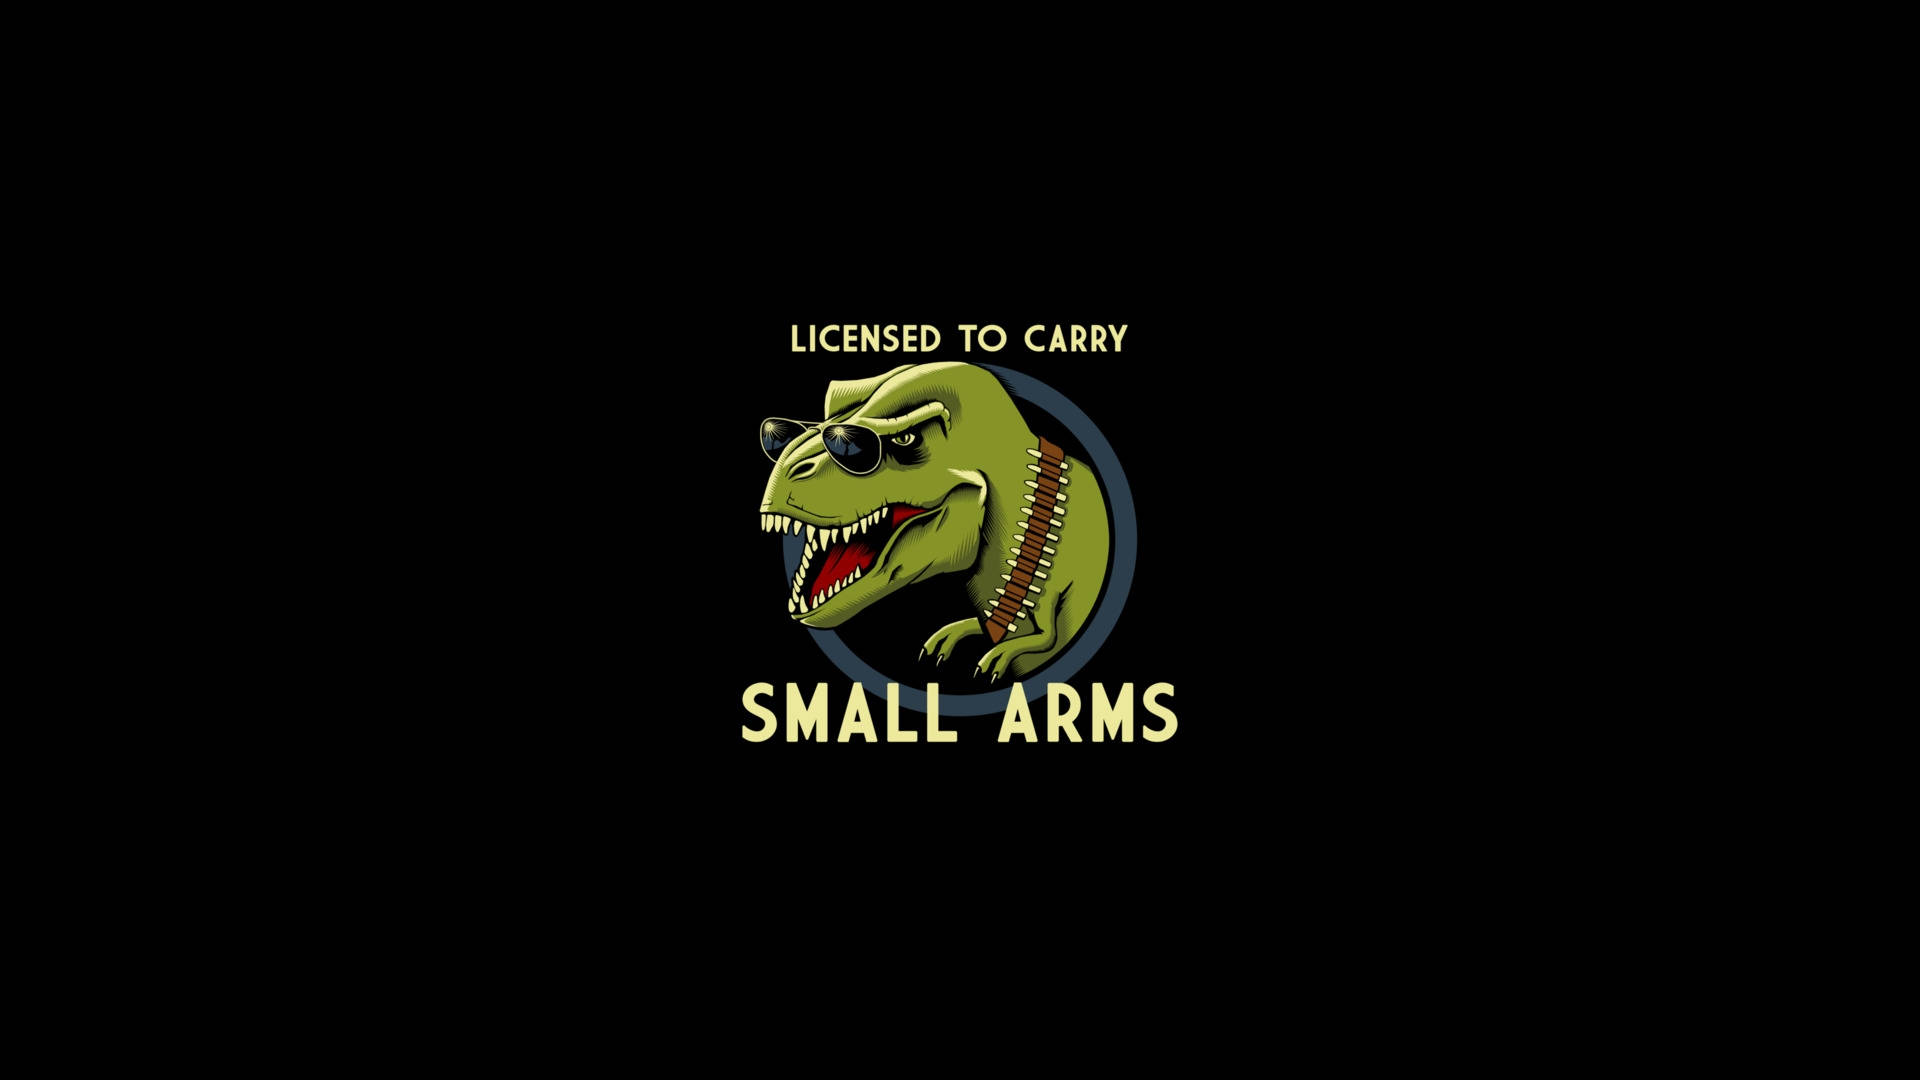 Dinosaur Small Arms Humor Background